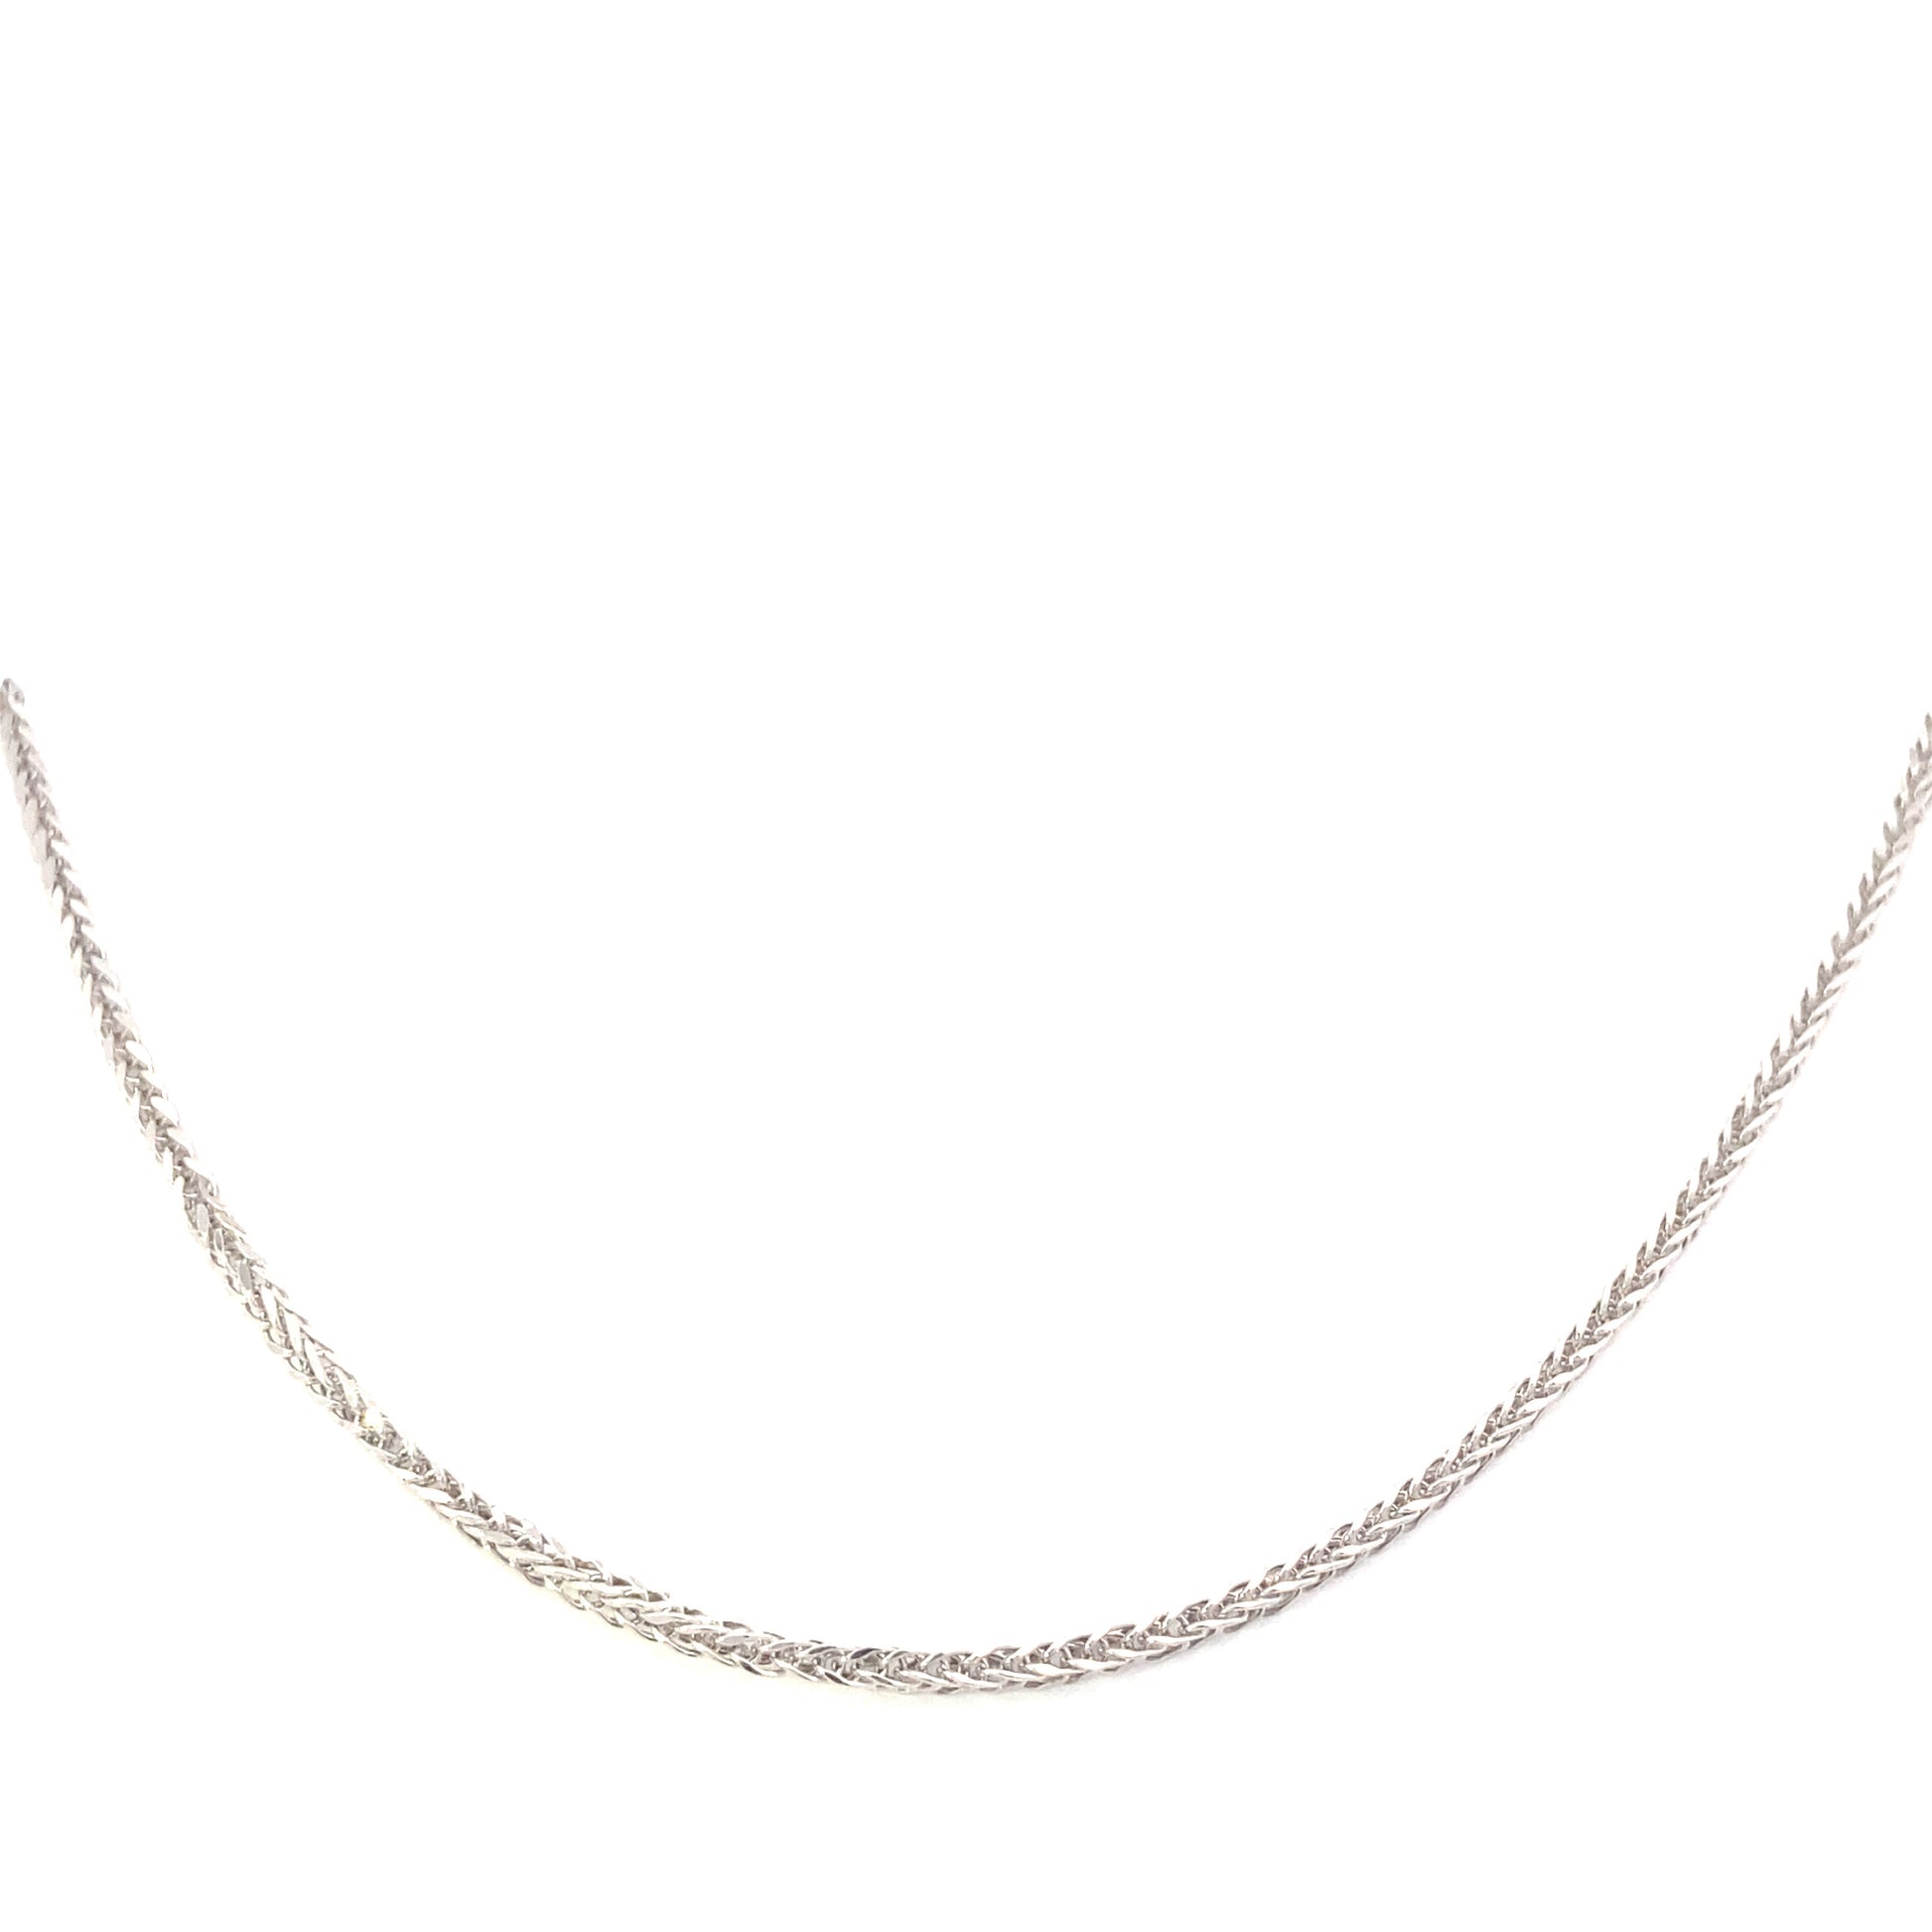 14K White Gold Franco Necklace | Luby Gold Collection | Luby 